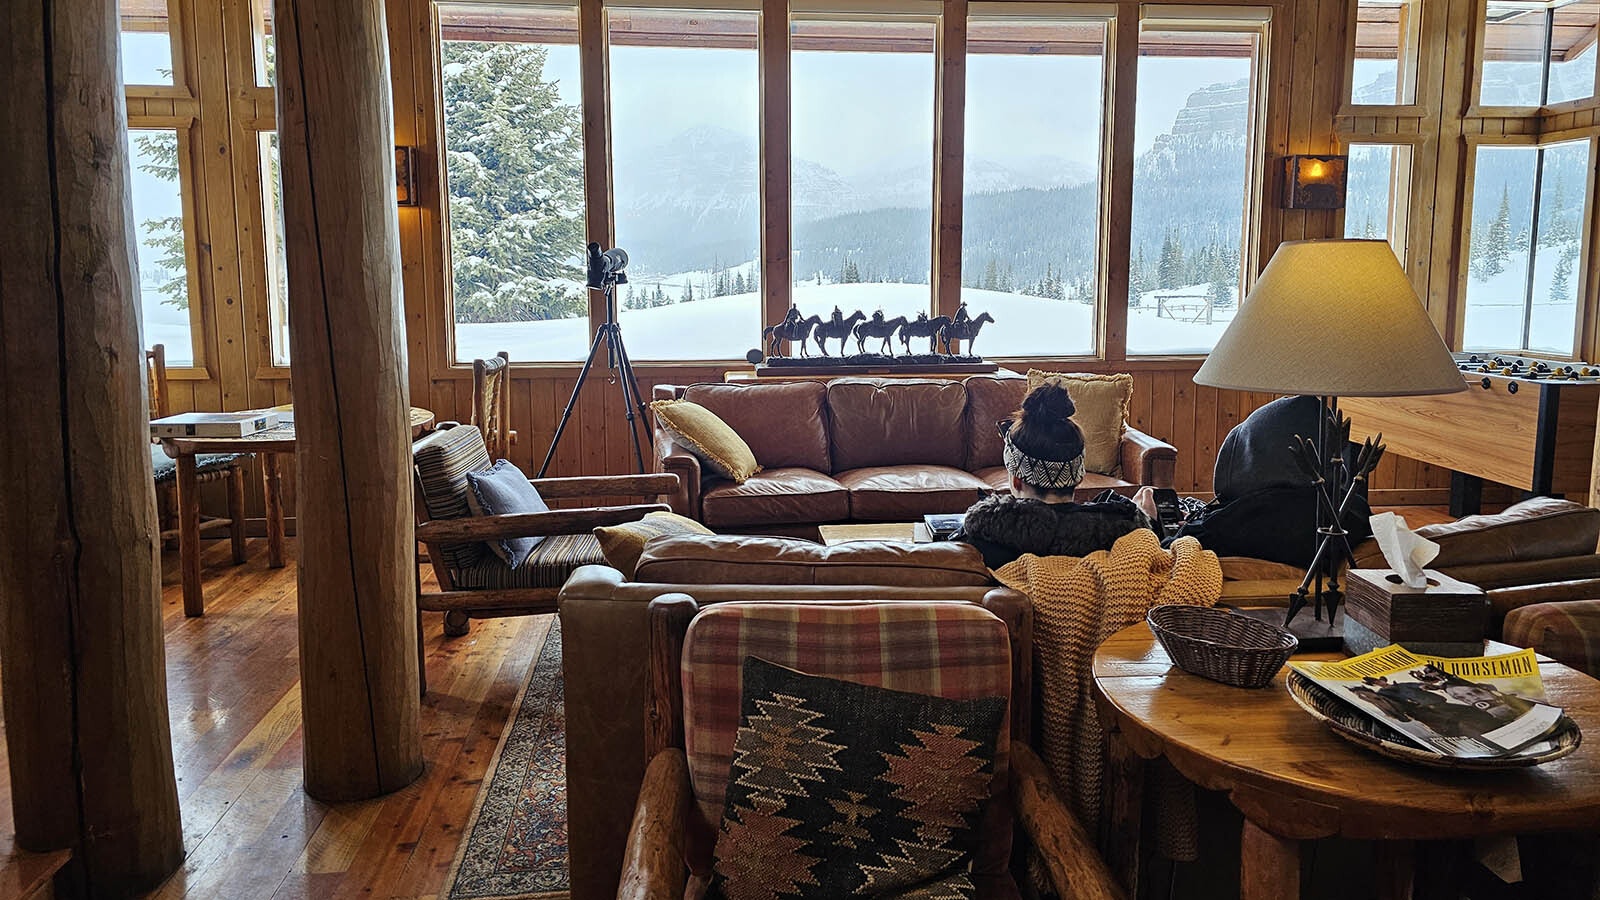 The lodge has many cozy nooks to sit and look outside at the view, just like a real snow globe.